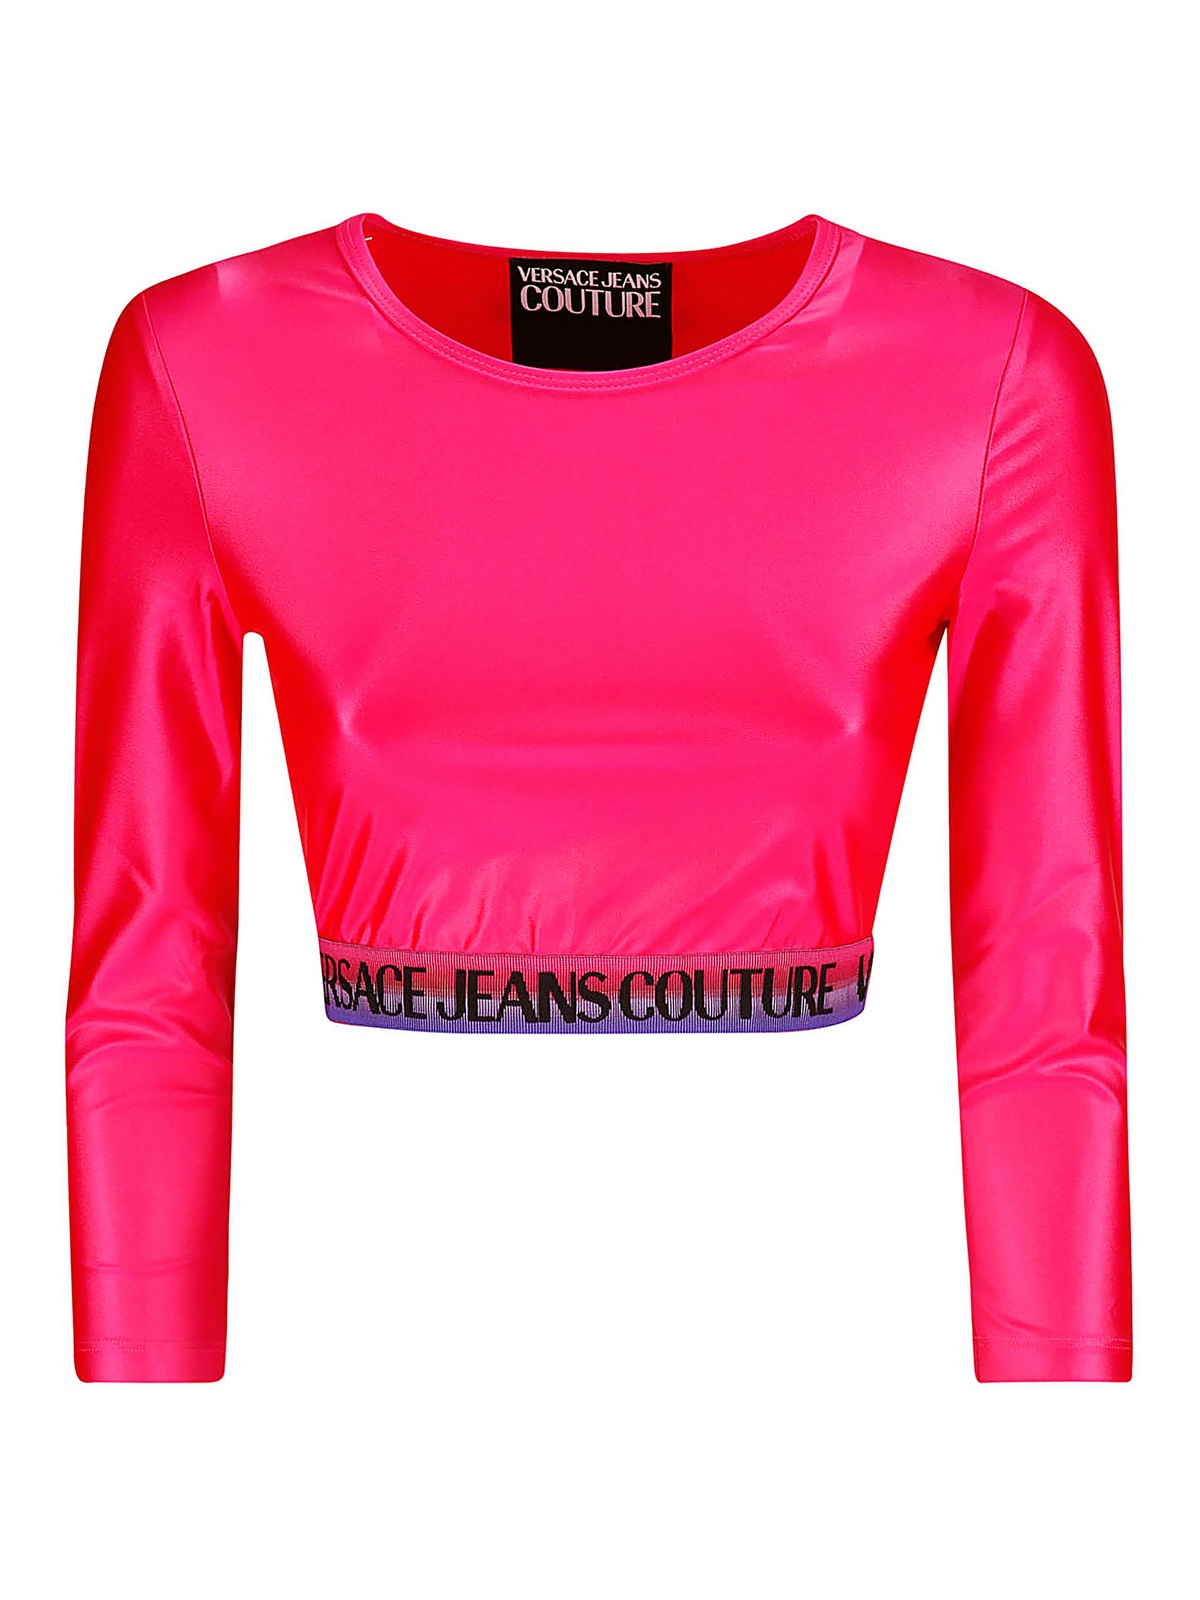 Versace Jeans Couture Pink Shiny Long Sleeve T-shirt In Fuchsia